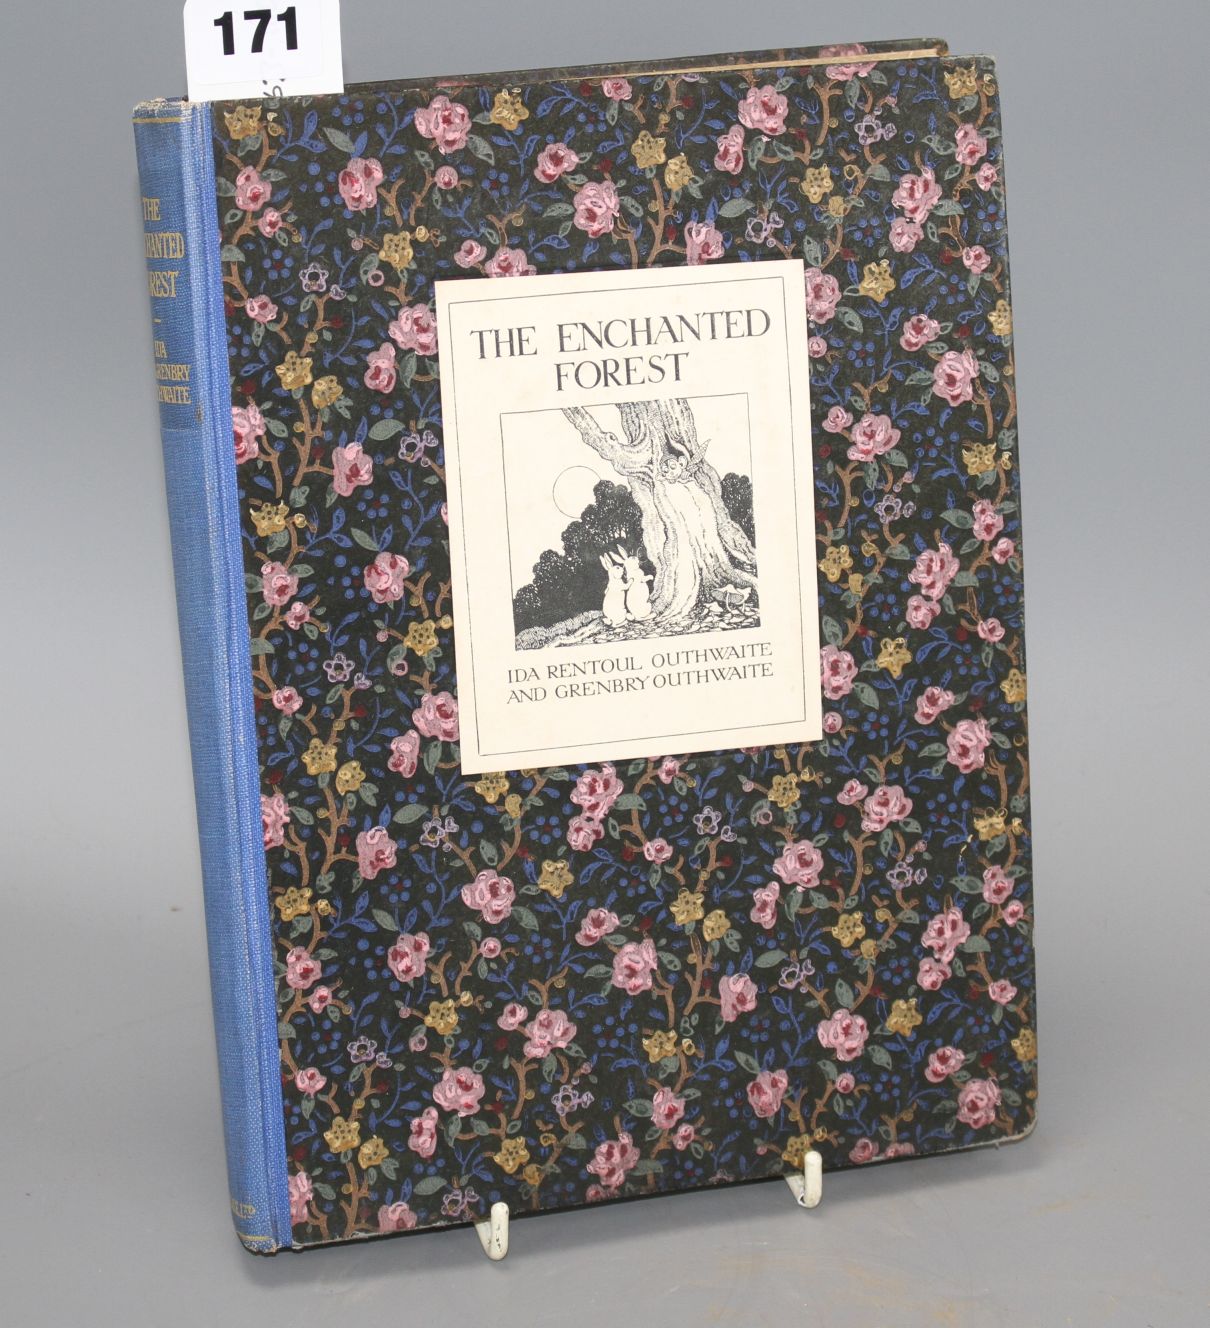 Outhwaite, Ida and Grenbry - The Enchanted Forest, A & C Black Ltd 1925 Condition: good condition - Image 5 of 8